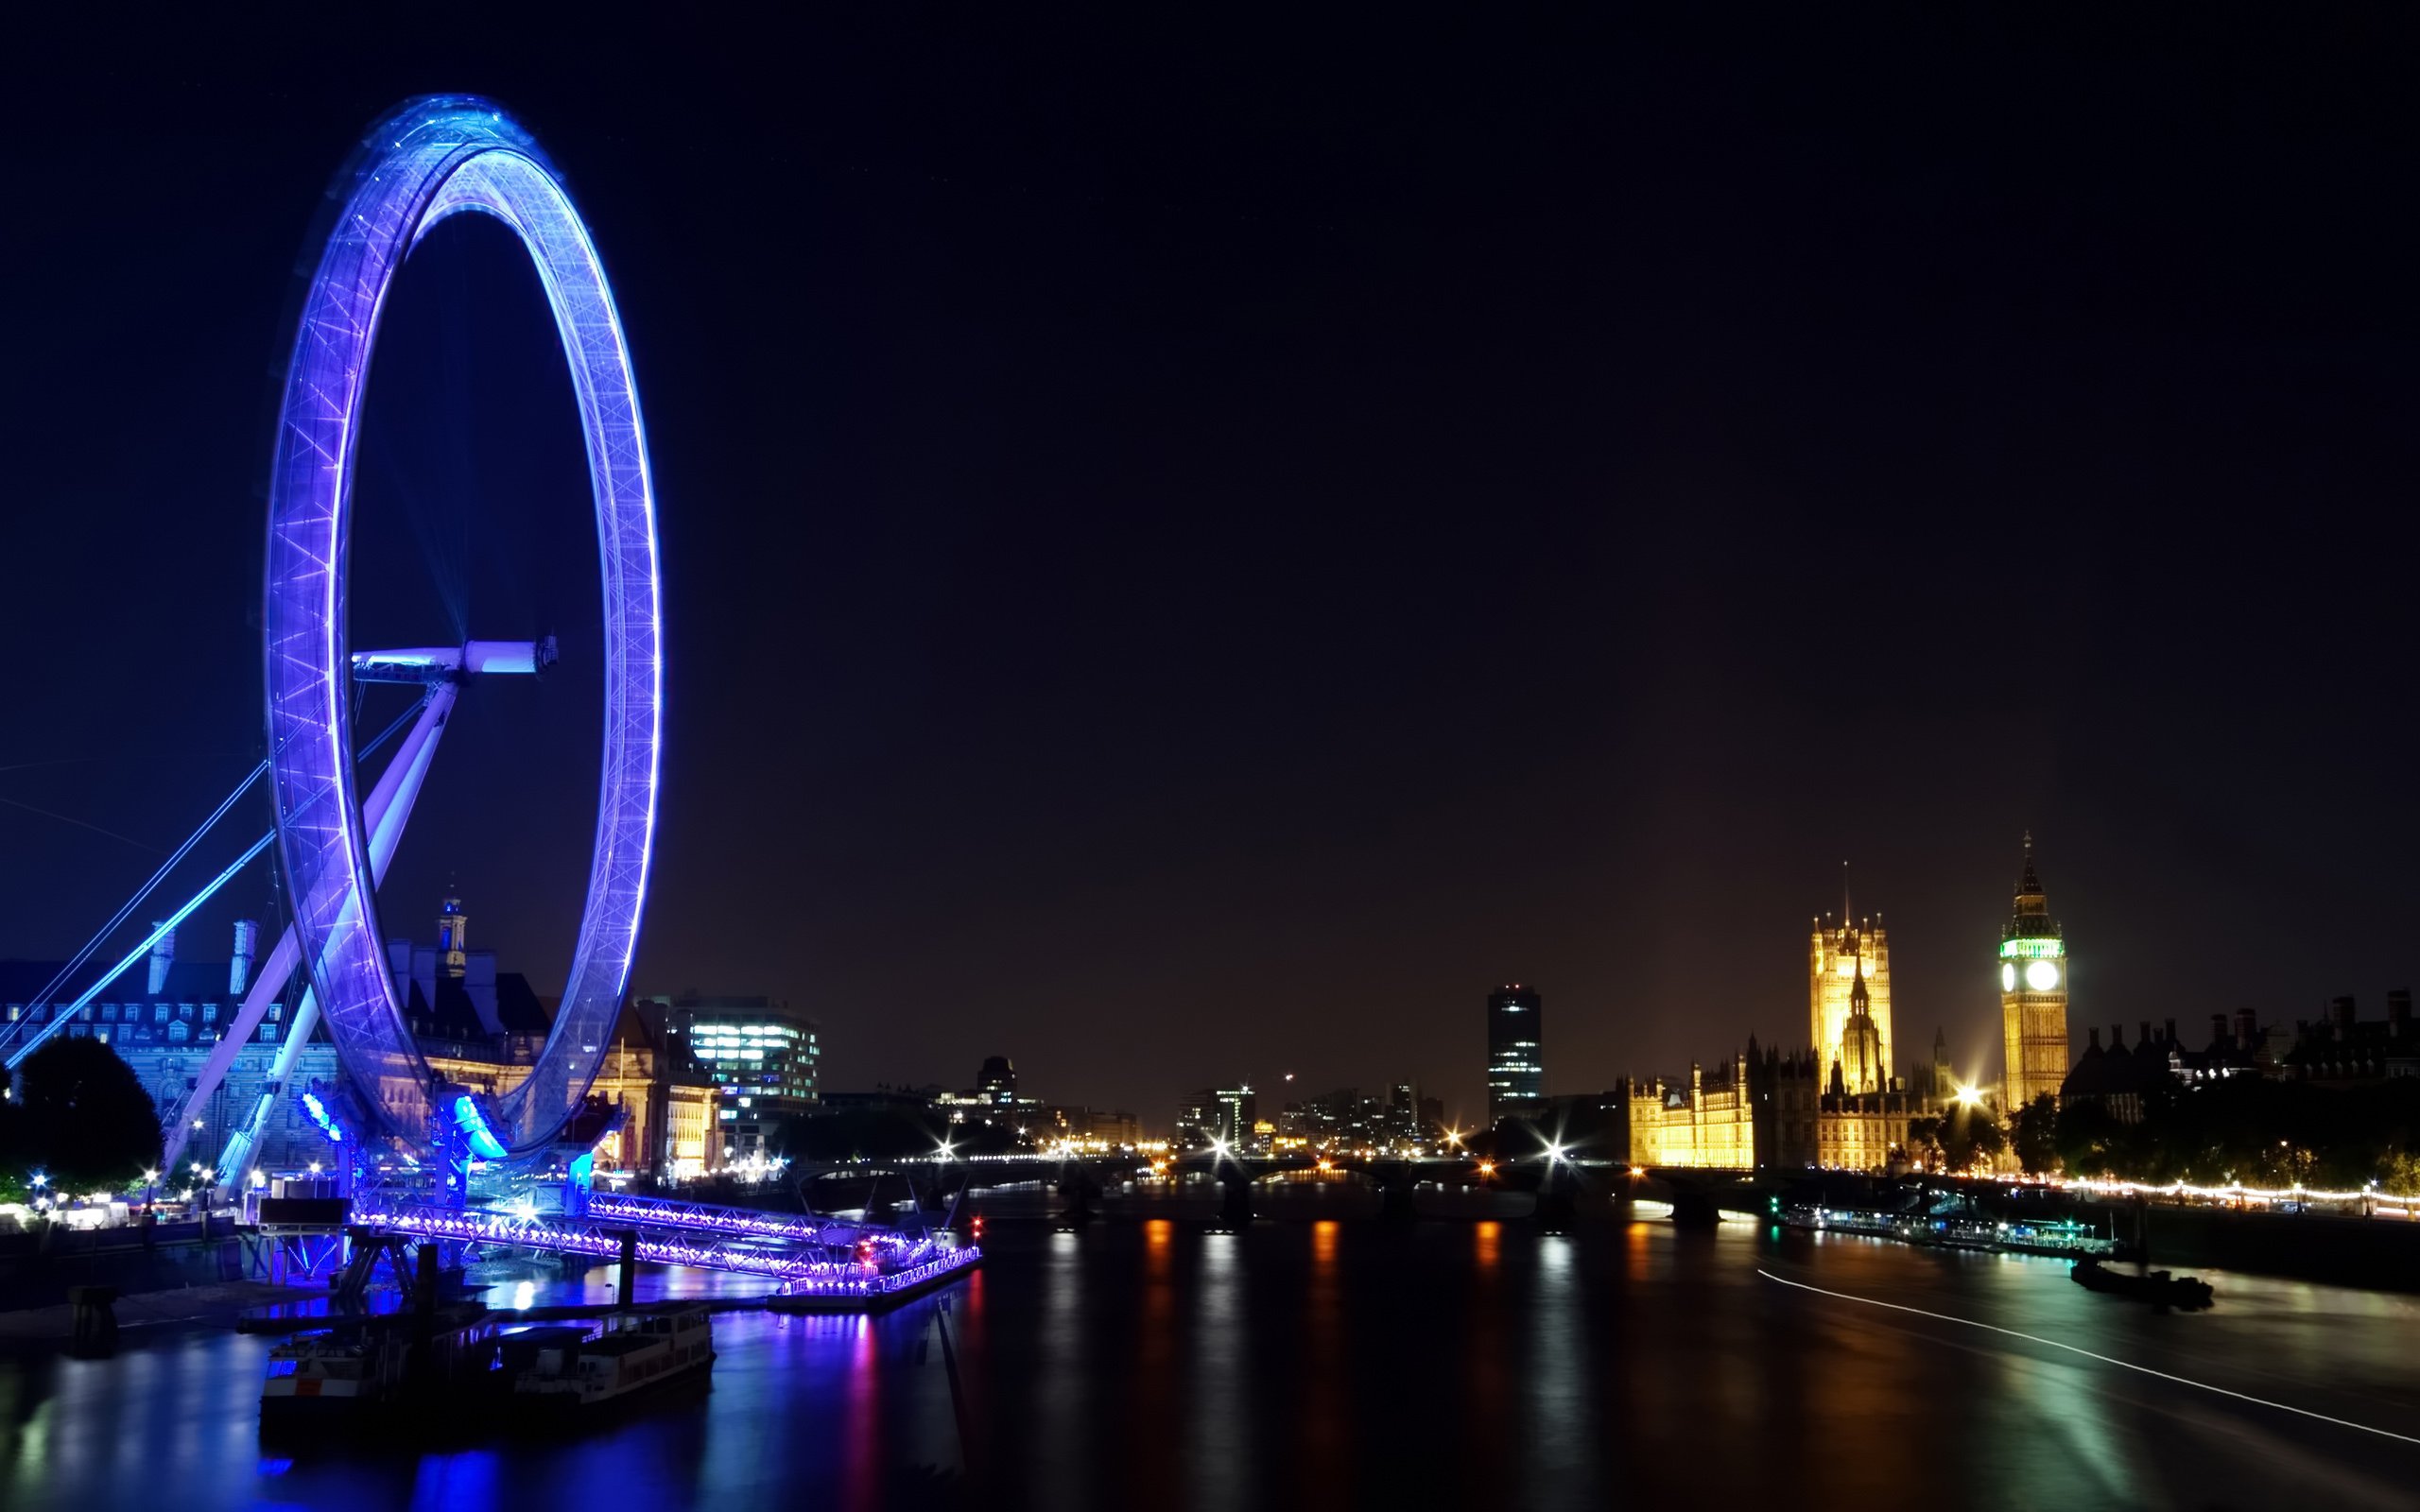  Sports wallpapers available here London Skyline at Night Wallpaper